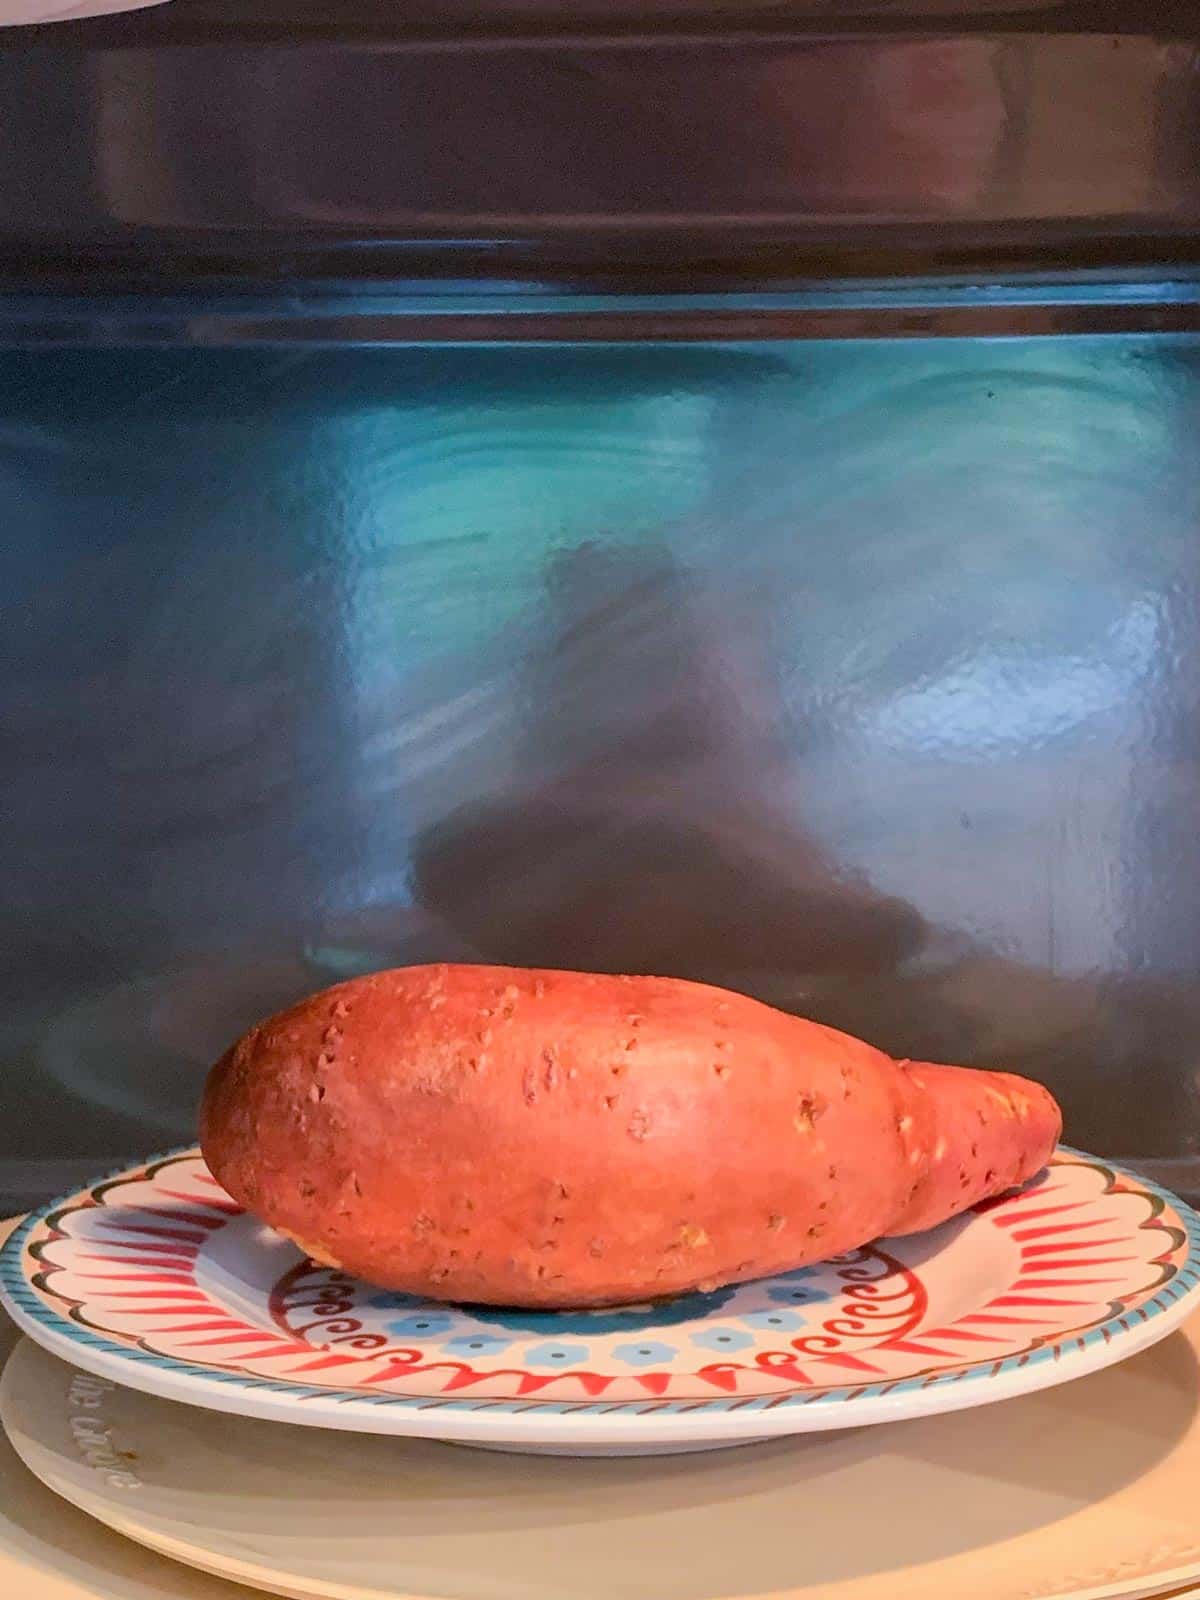 Sweet potato on a plate in a microwave.